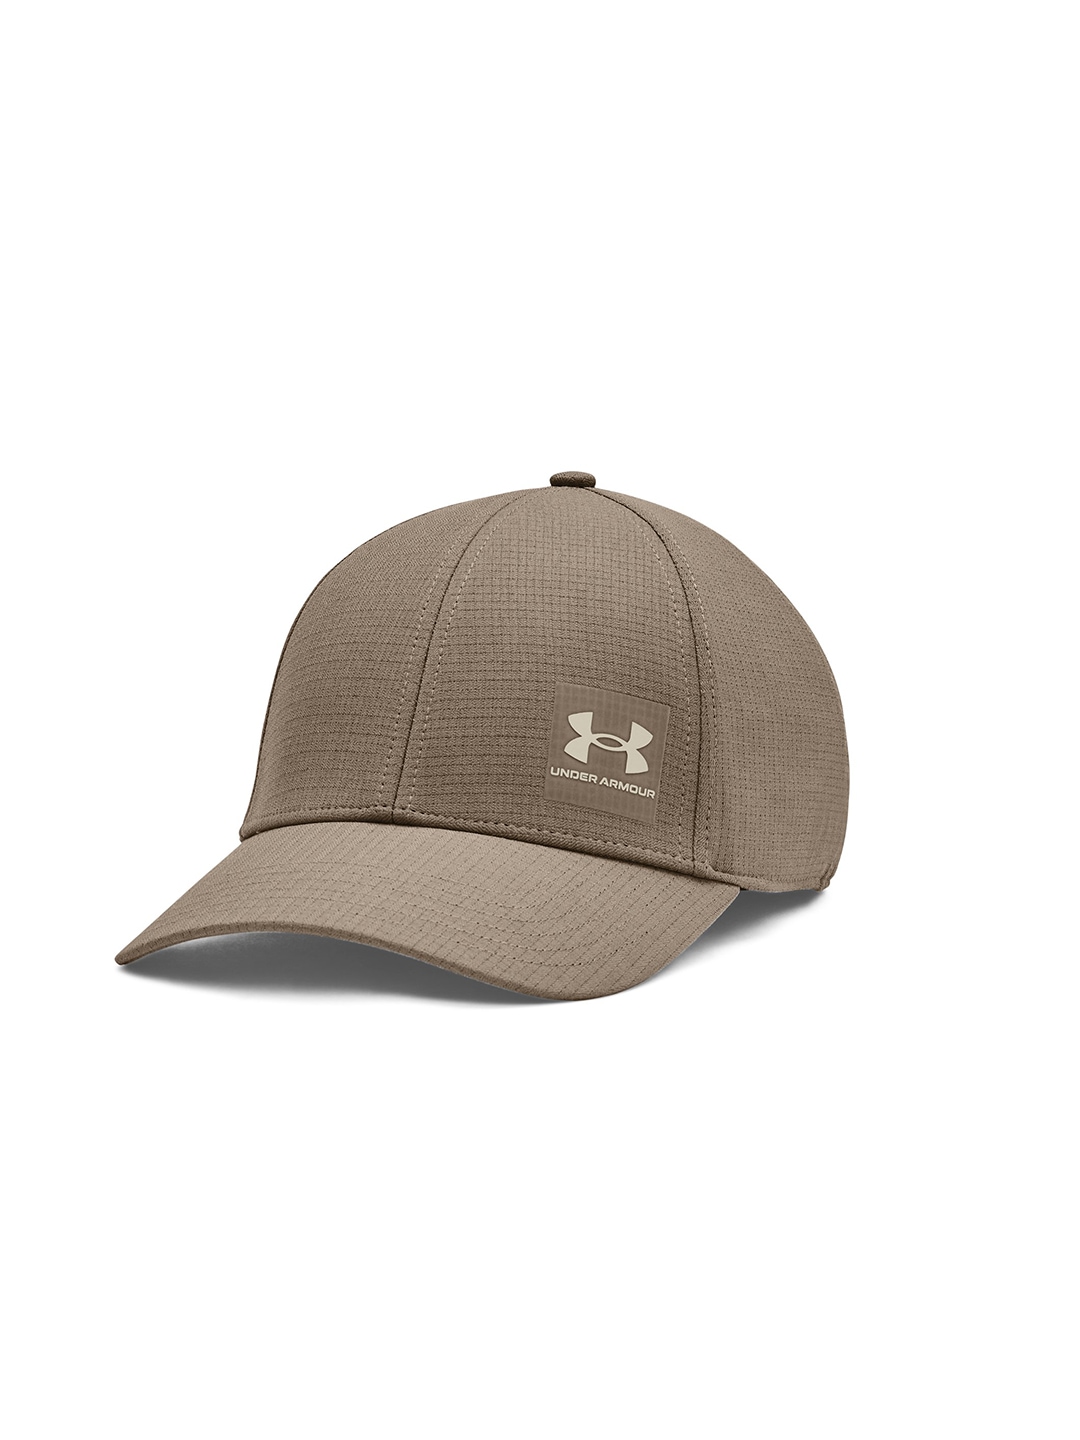 

UNDER ARMOUR Men Logo Printed Iso-Chill ArmourVent Stretch Baseball Cap, Brown